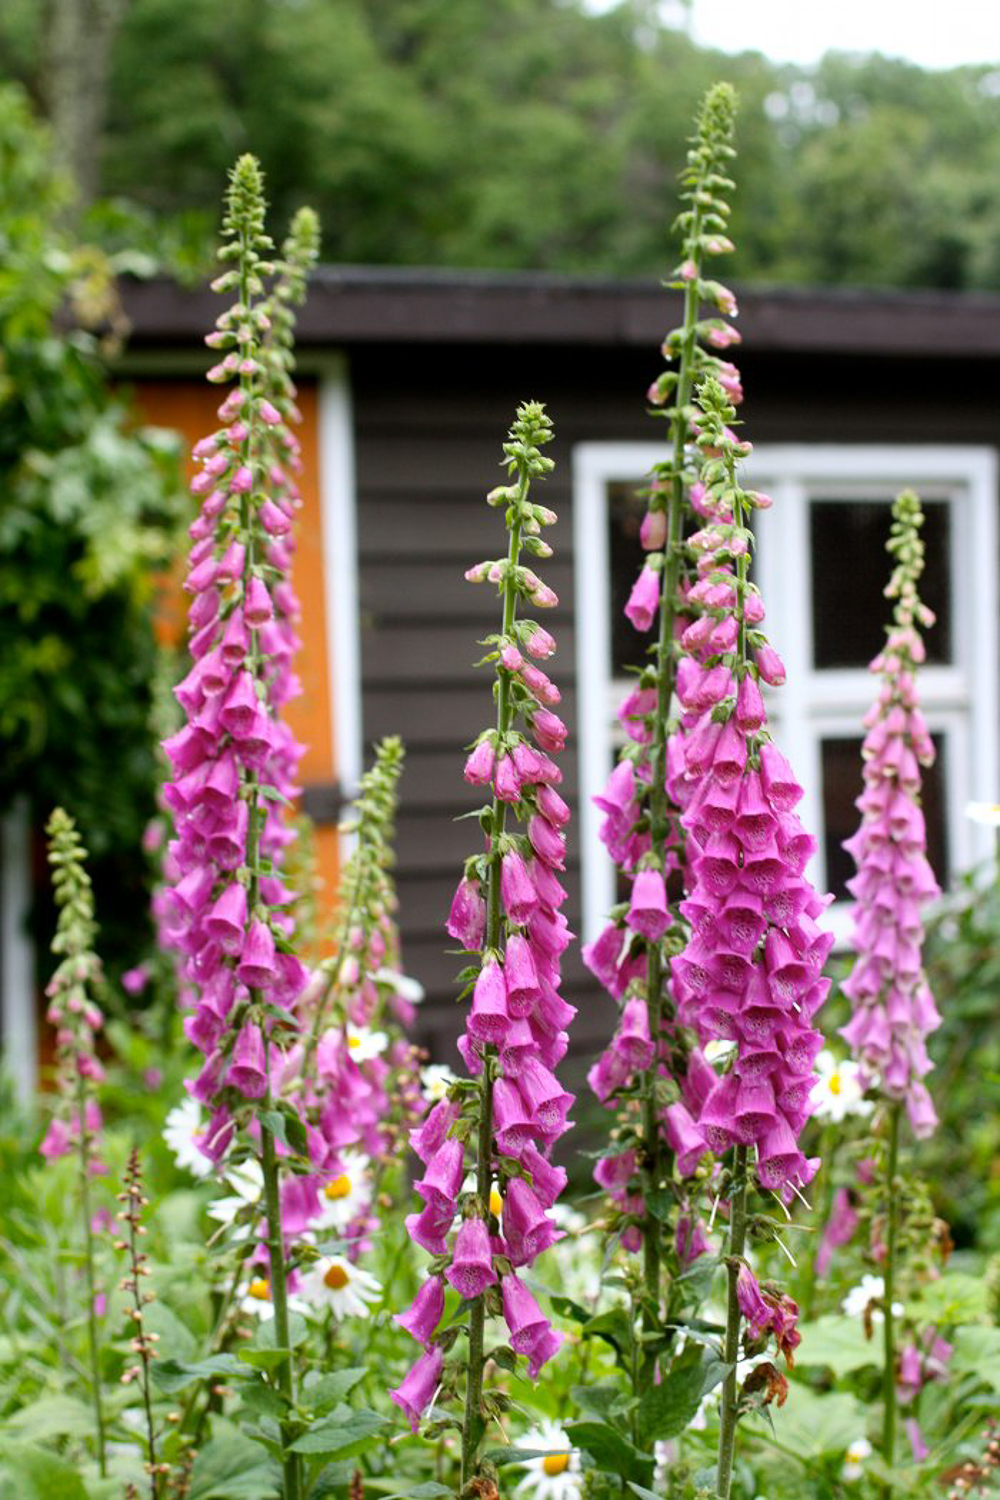 My simple and easy foxglove planting strategy